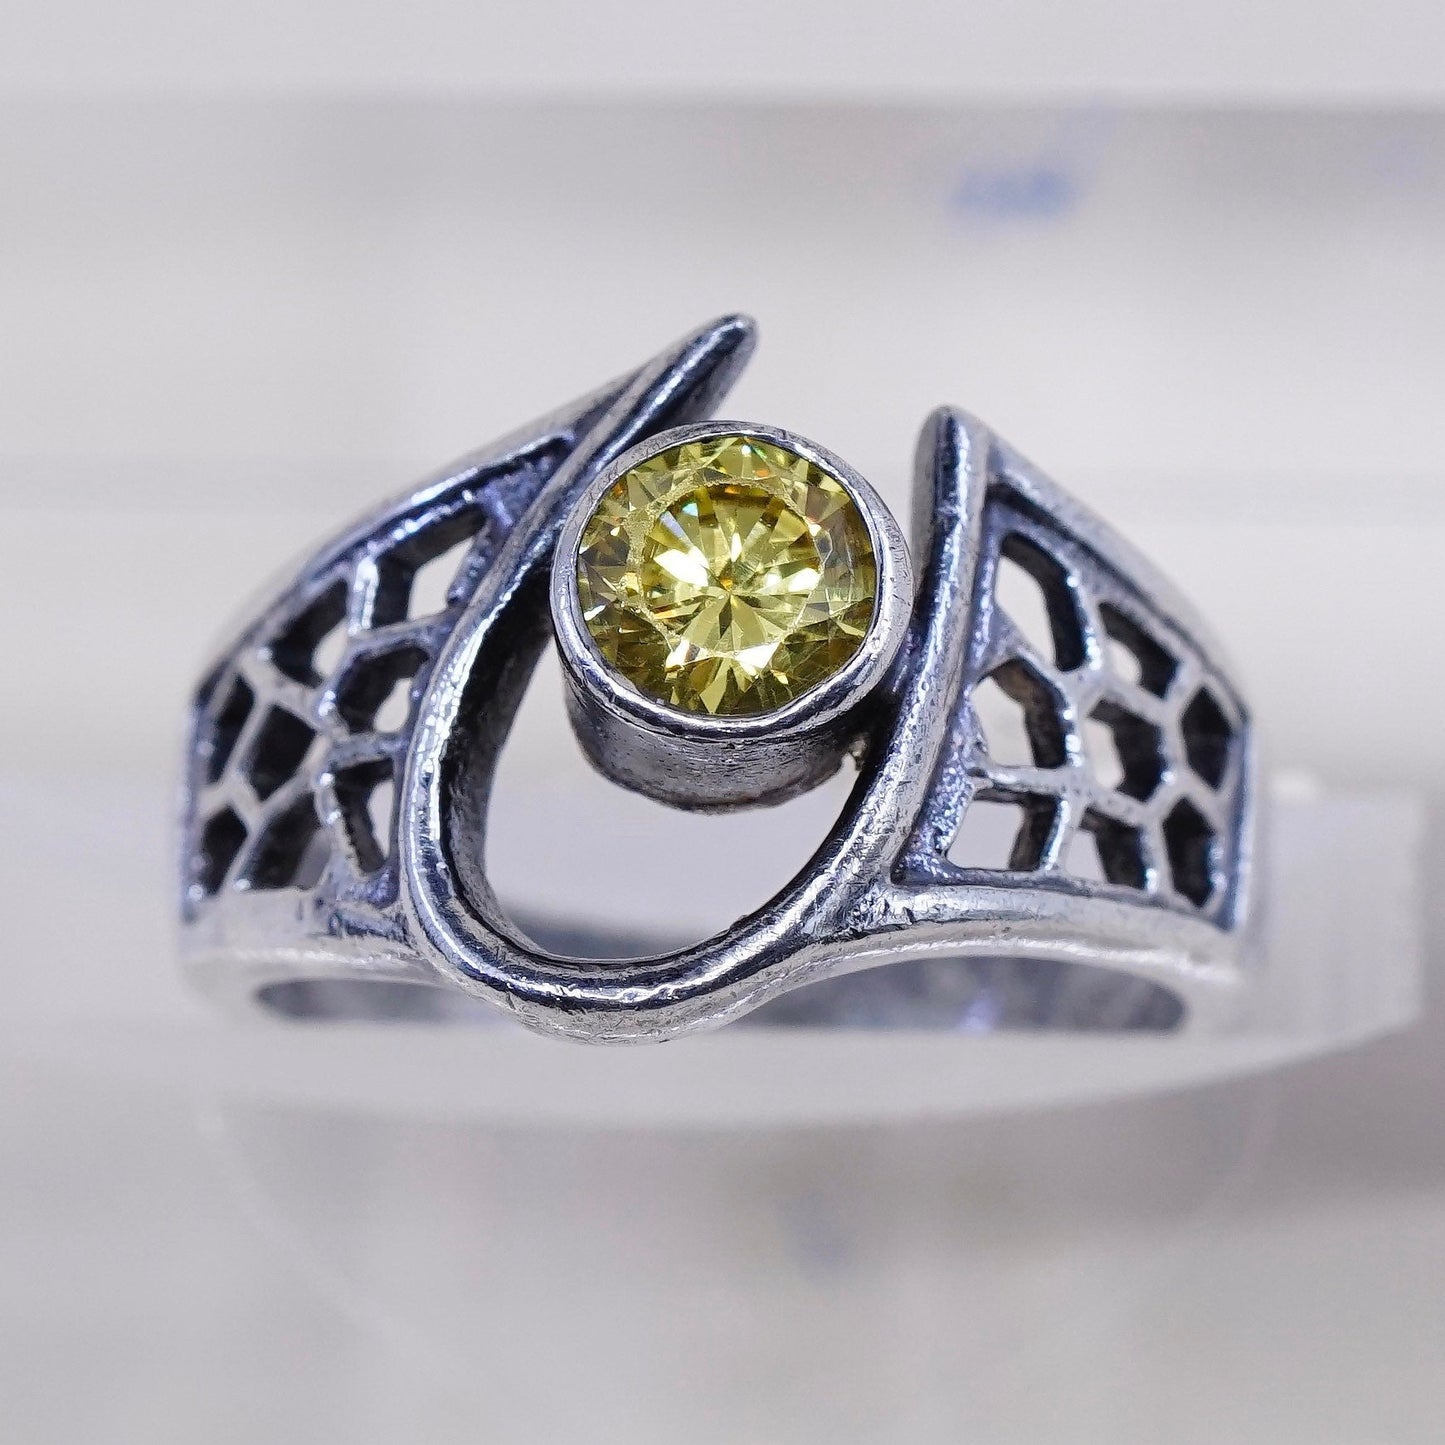 Size 5, vintage Sterling silver handmade ring, filigree 925 with citrine